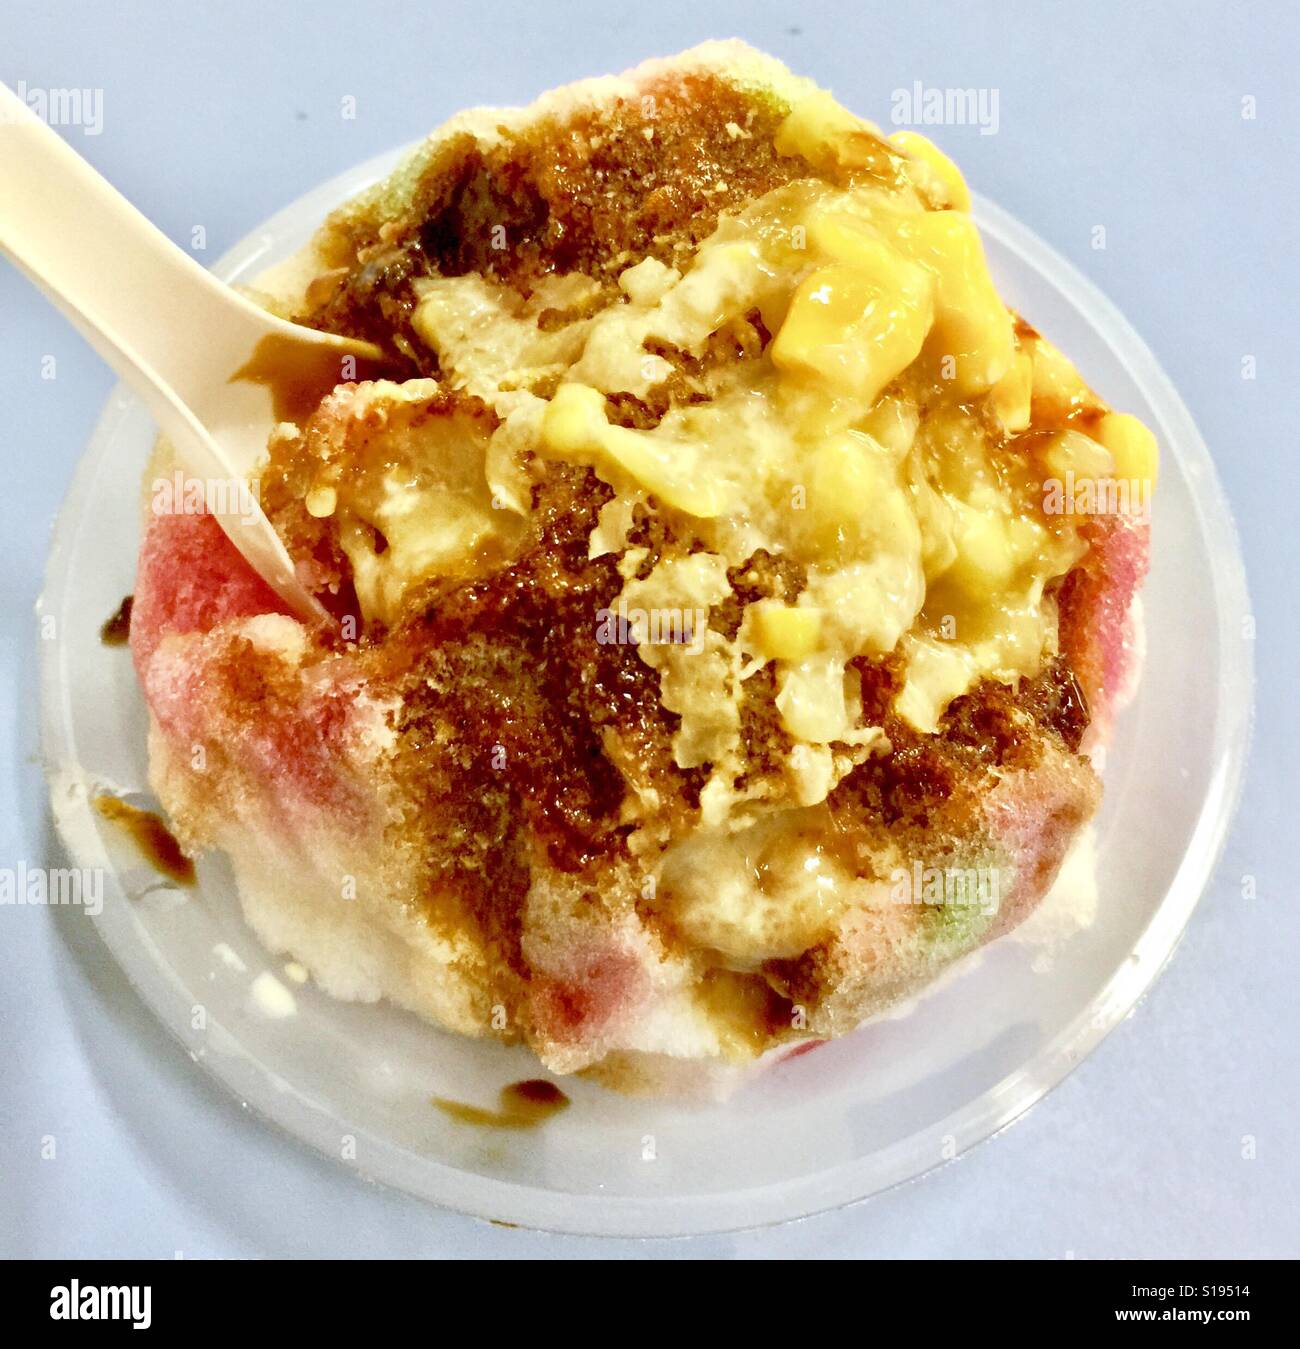 Singapore dessert - shaved ice topped with syrup, palm sugar and sweet corn (ice kachang) Stock Photo